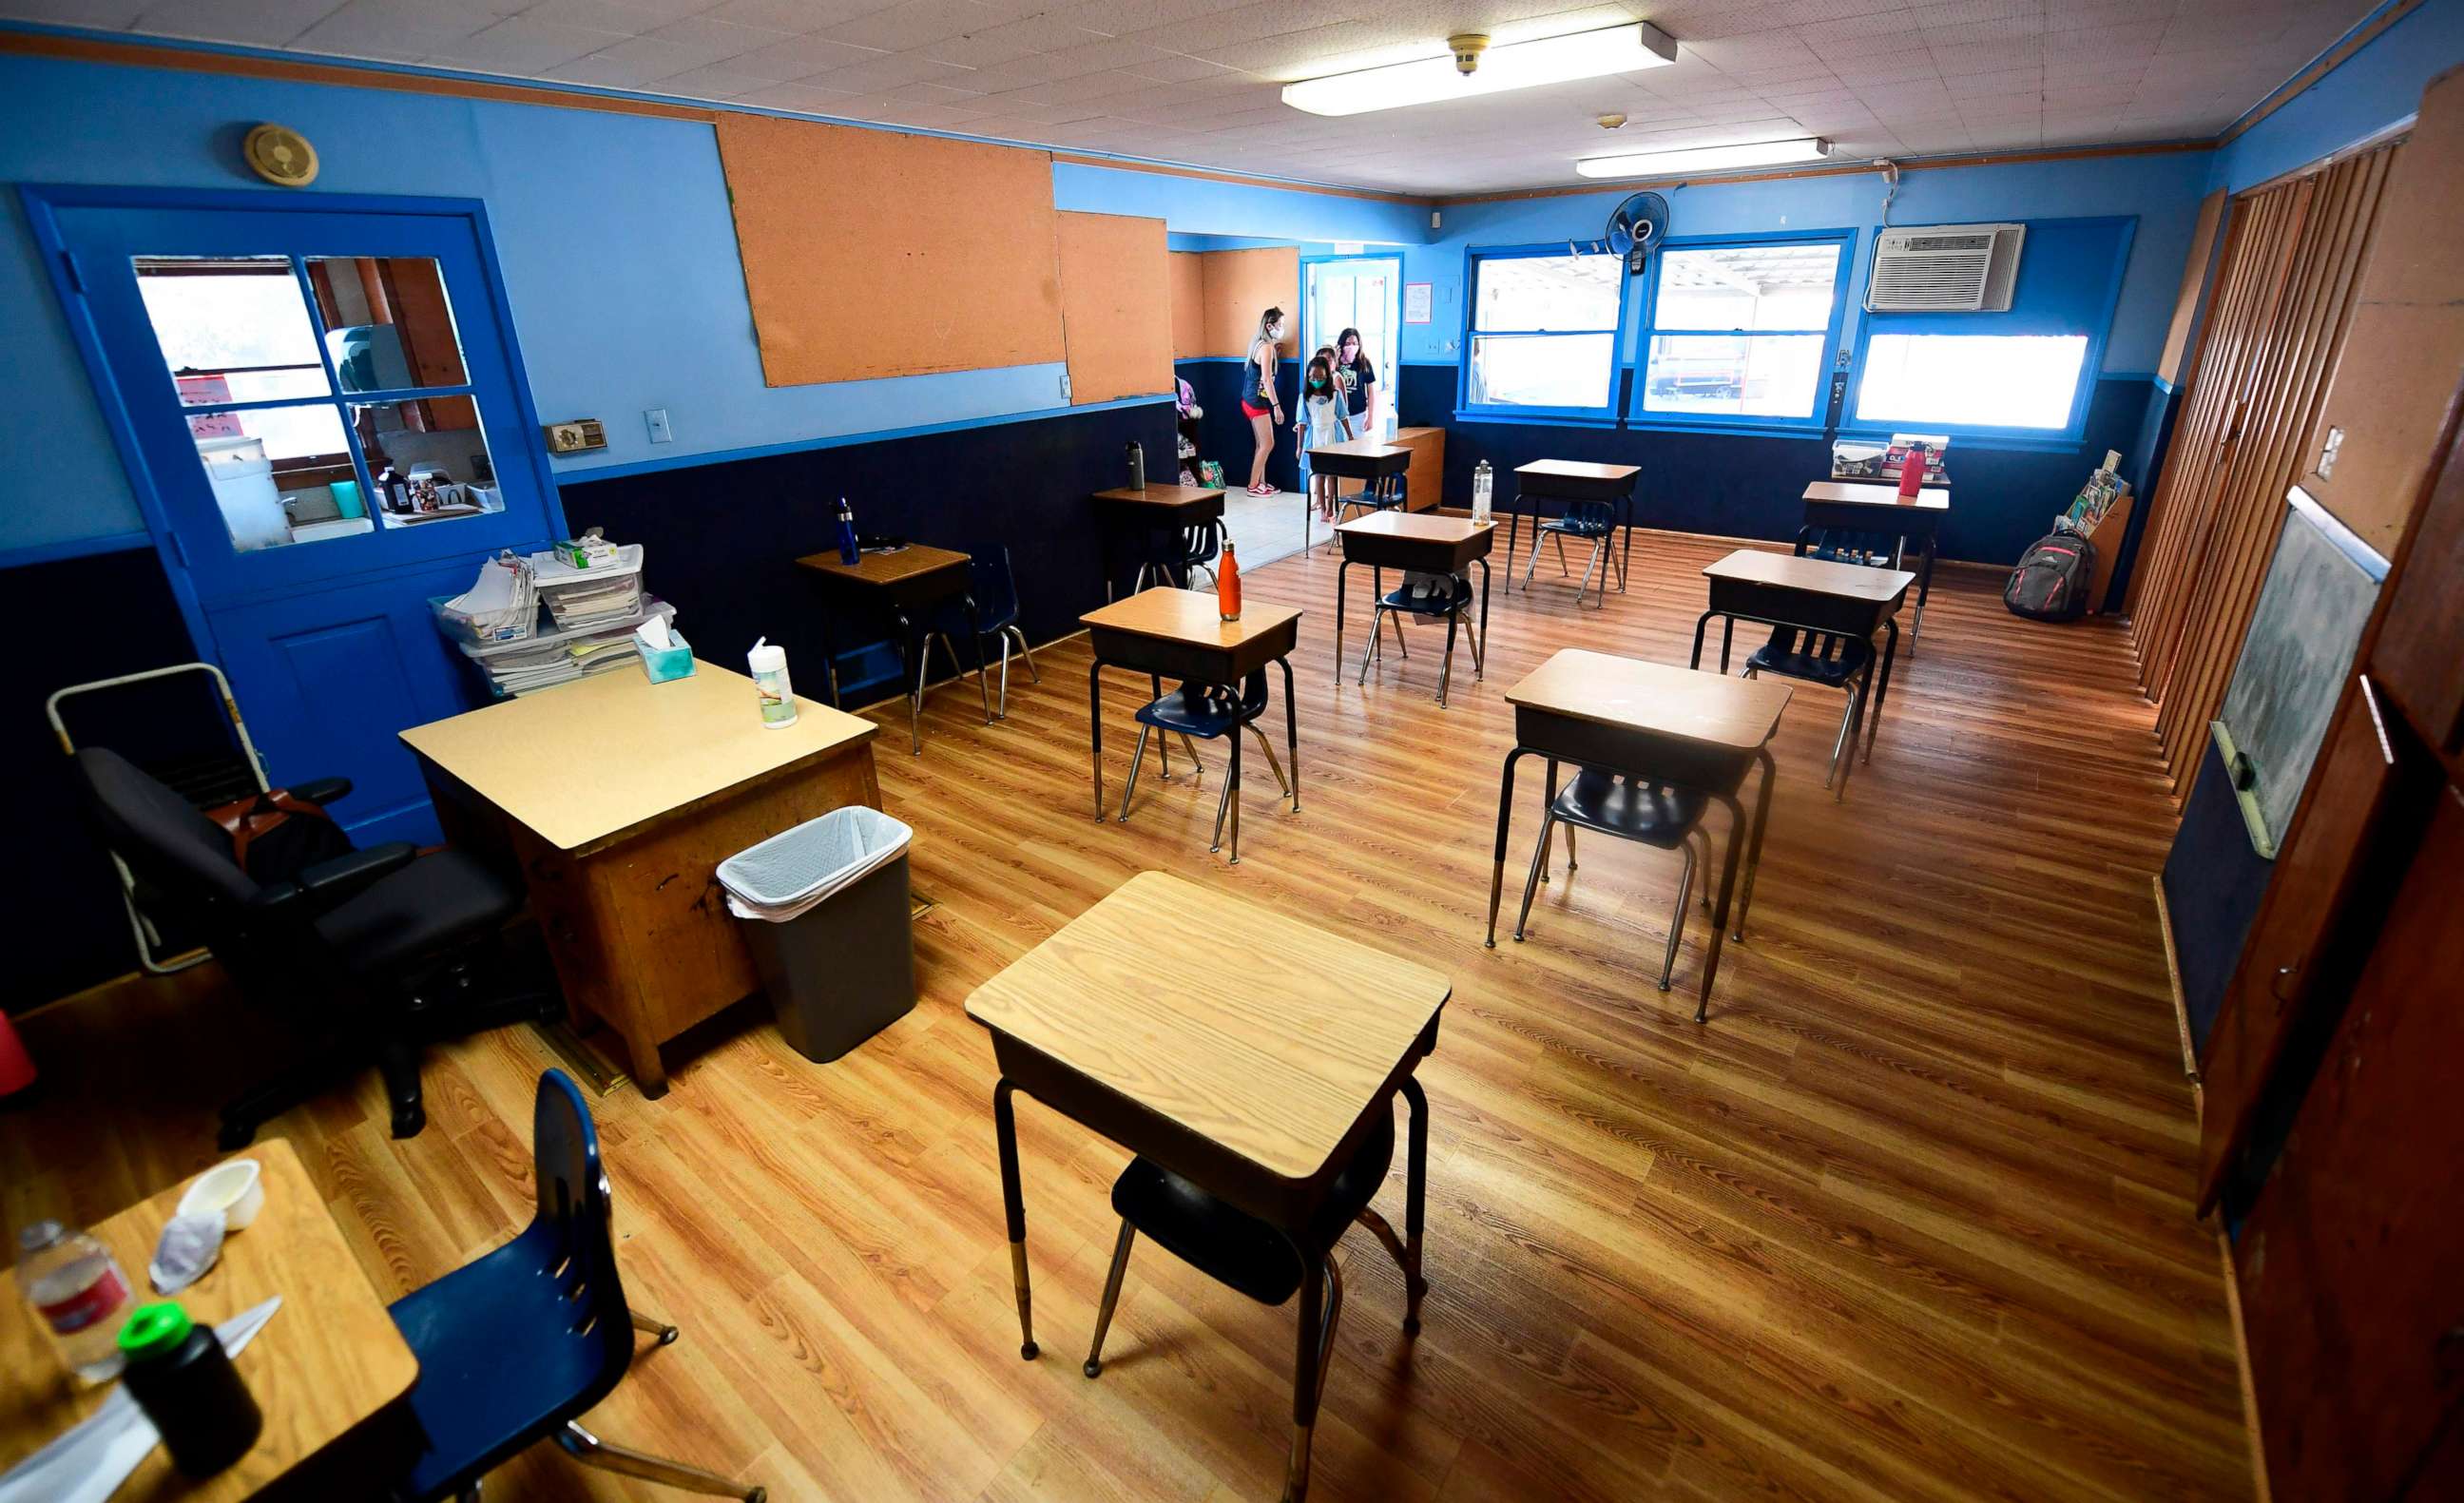 PHOTO: Children, wearing masks, enter a classroom with desks spaced apart, as per coronavirus guidelines, during summer school sessions in Monterey Park, Calif., July 9, 2020.